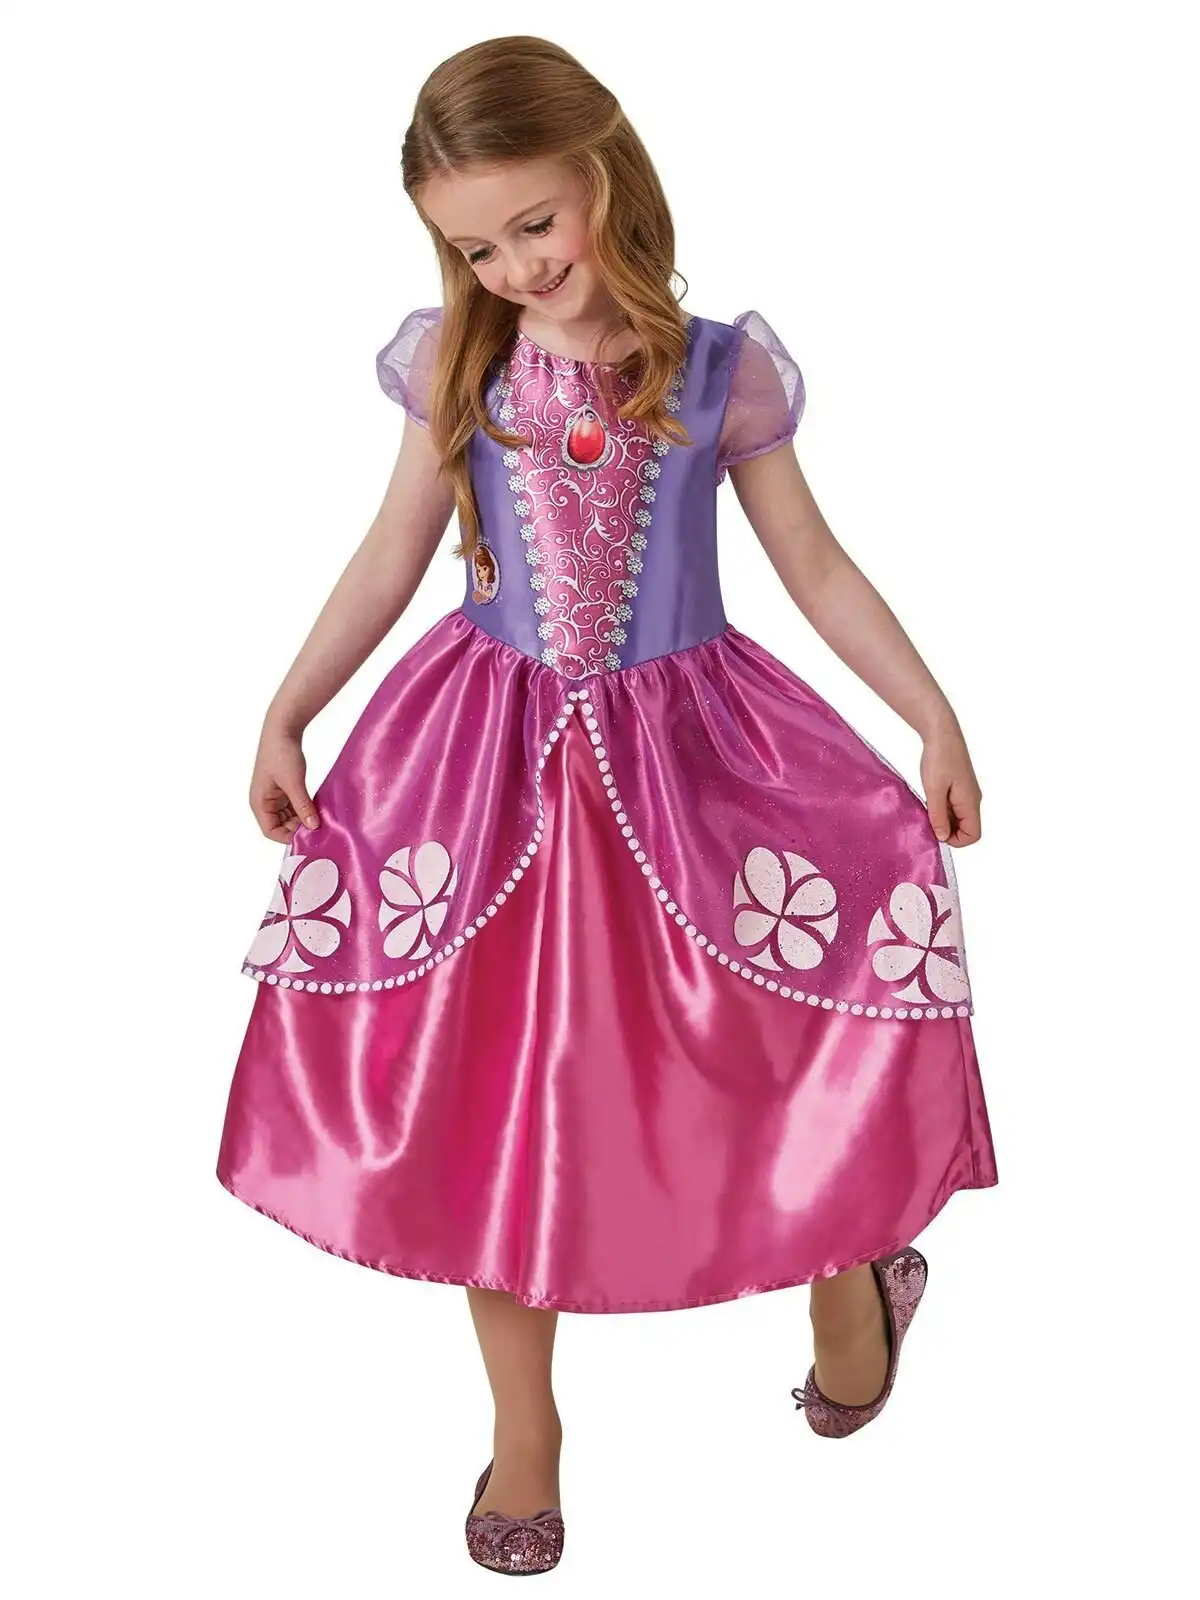 Disney Sofia the First Classic Pink Dress Halloween Party Kids Costume Size 3-5